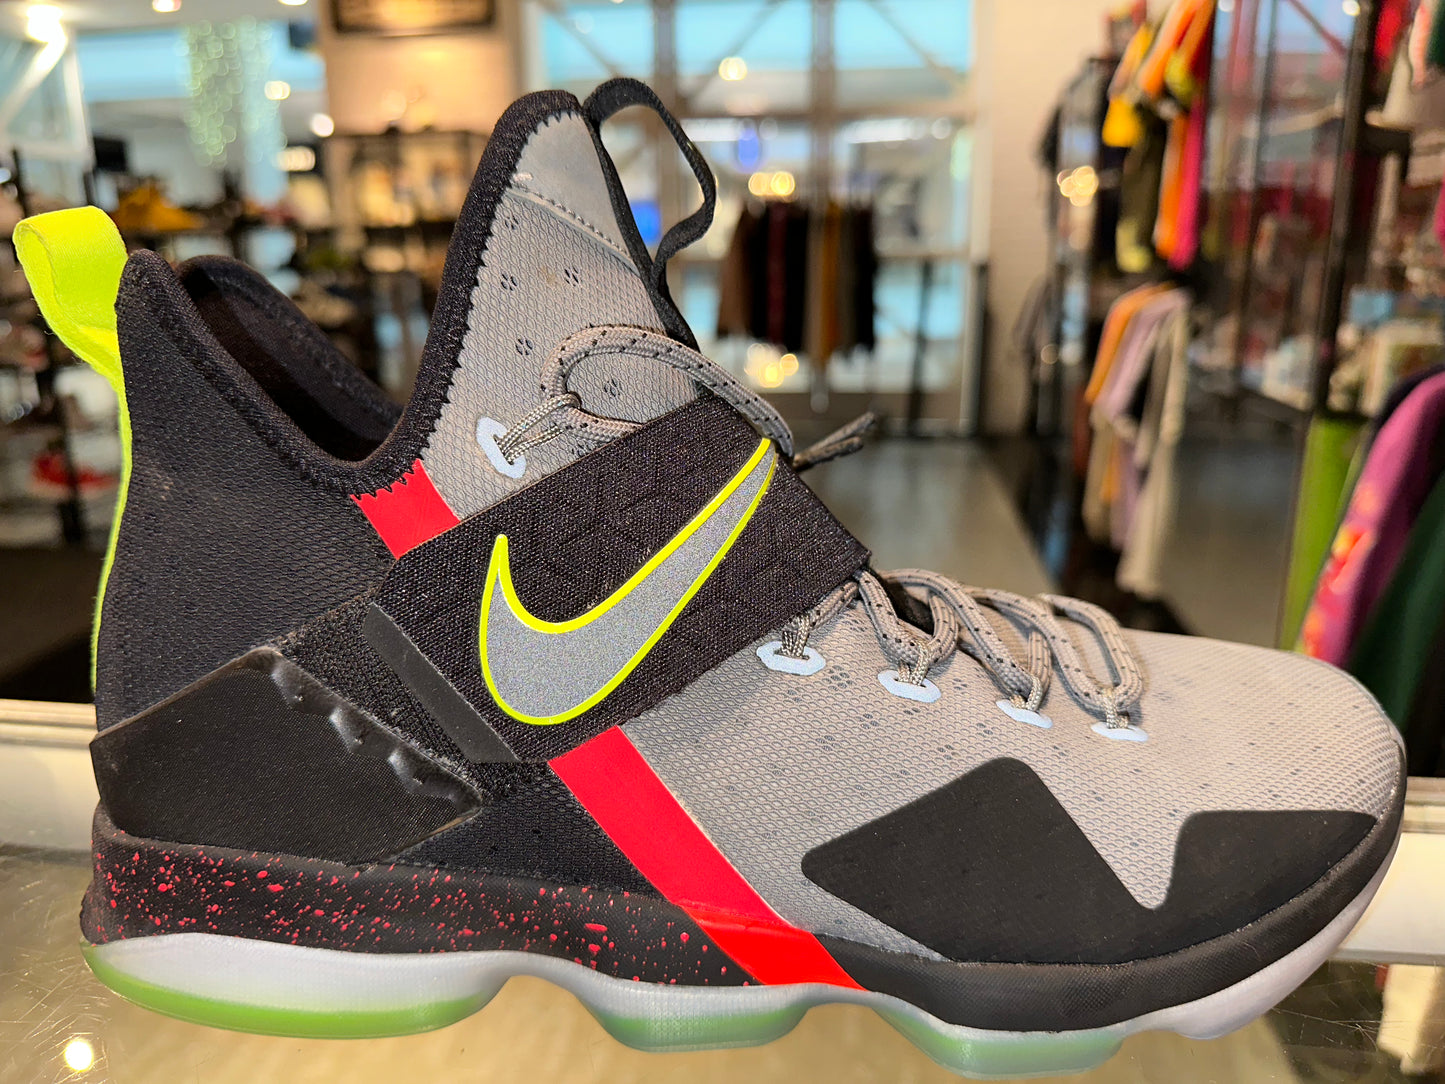 Size 11 Lebron 14 “Out of Nowhere” (Mall)